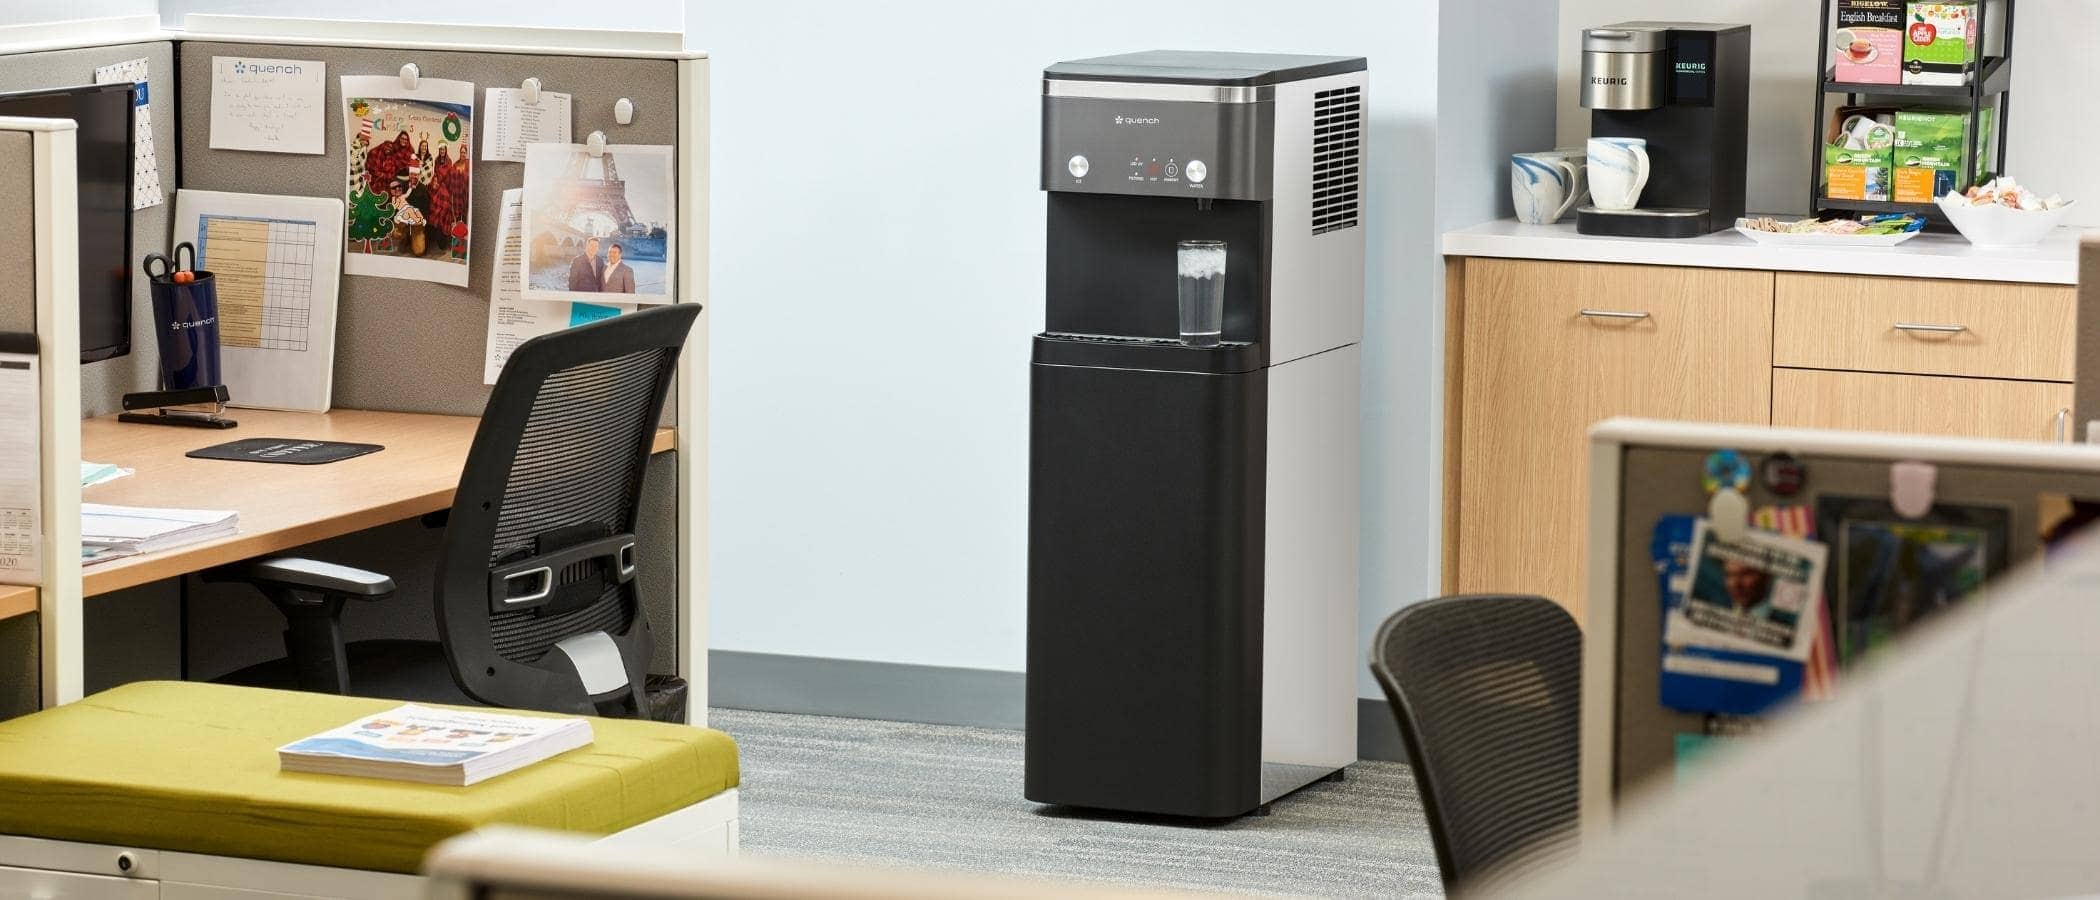 ice machine in office